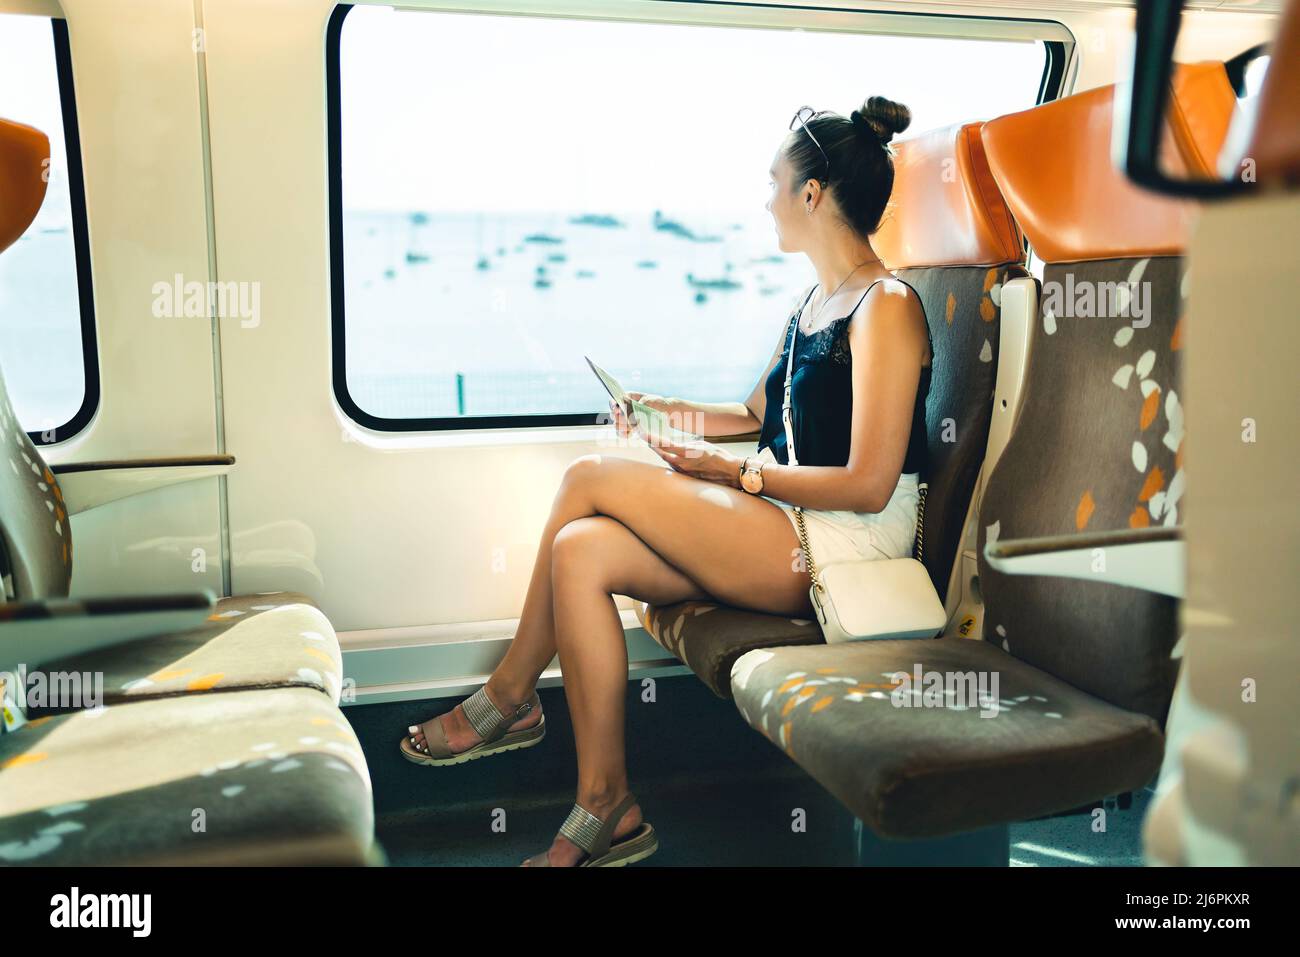 Train travel in summer. Young woman on rail trip in Europe. Railway passenger on journey to vacation destination. Girl looking out the window. Stock Photo